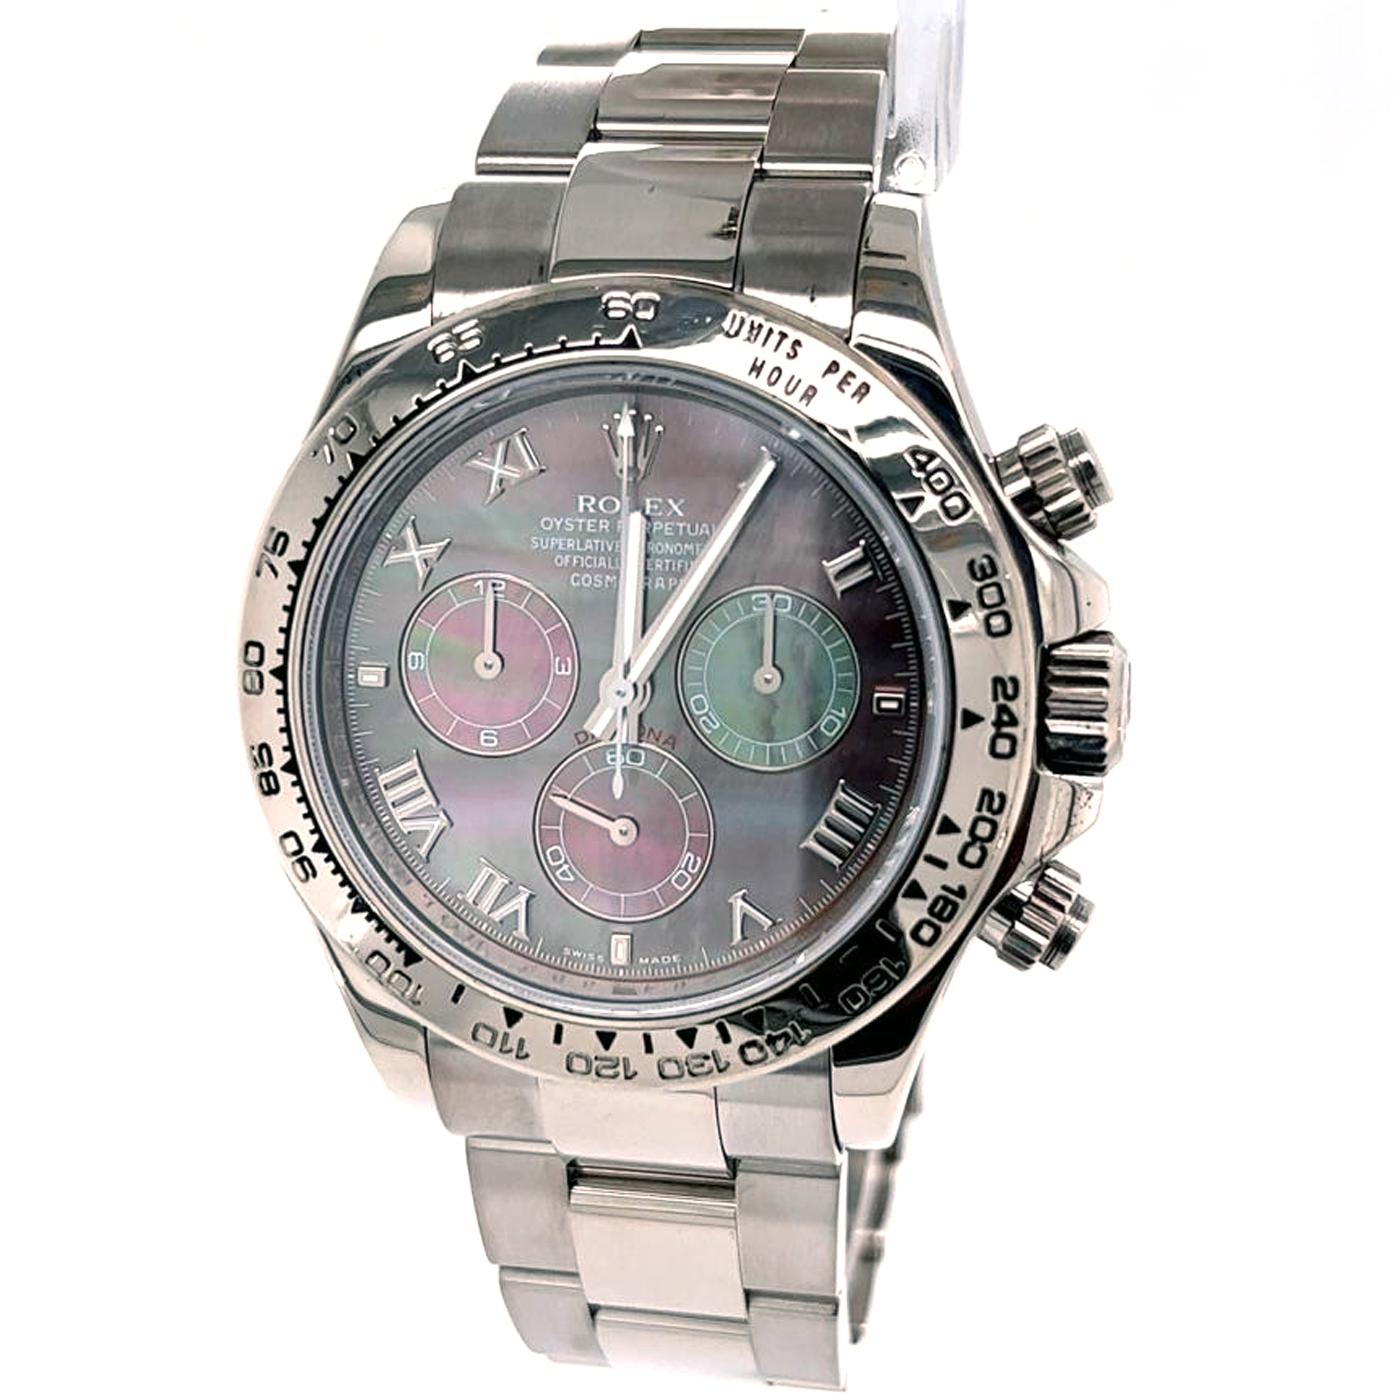 Rolex Daytona in 18k white gold with the black mother-of-pearl Roman dial. This Rolex watch has a 40mm case in solid 18k white gold with a white gold Tachymeter bezel, an original Rolex black mother-of-pearl dial with Roman numeral number markers,